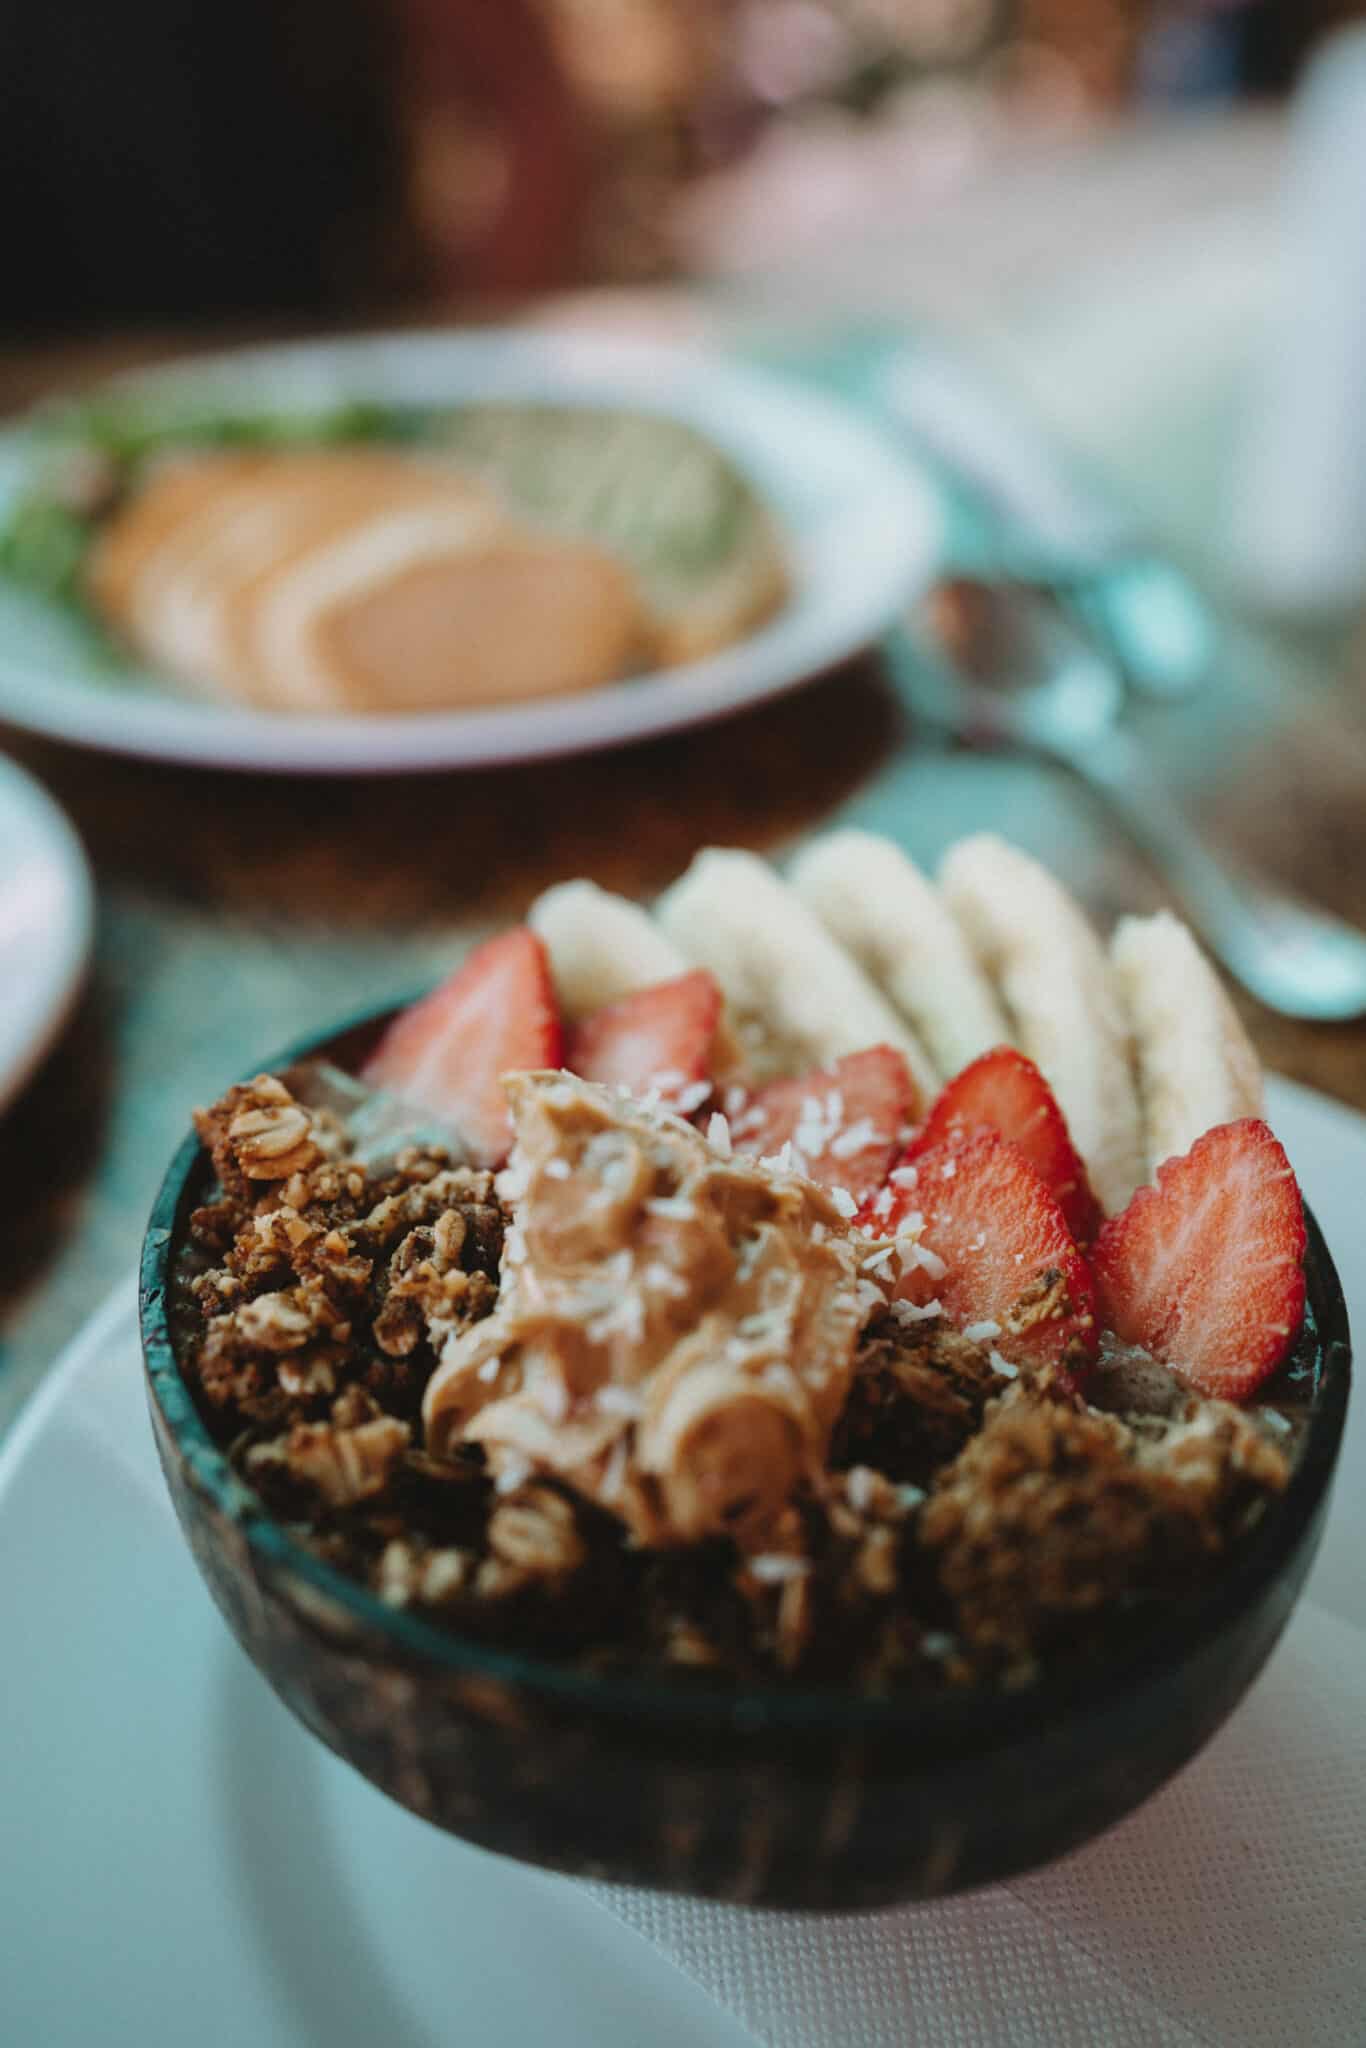 A bowl of granola with strawberries and bananas in Uvita Costa Rica.